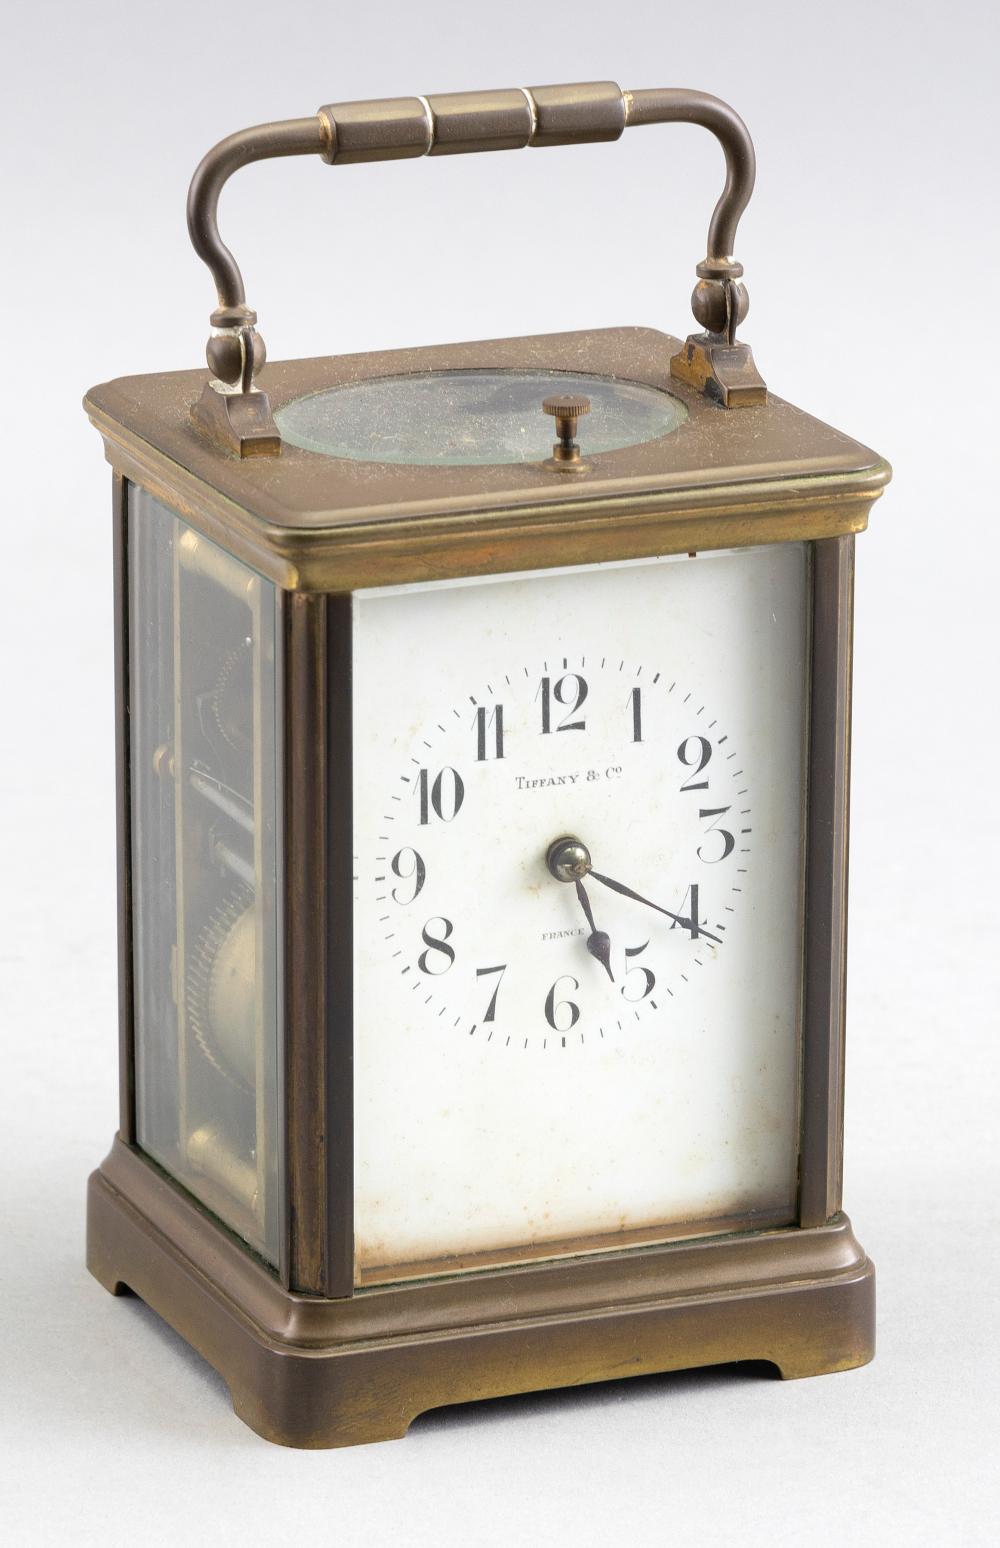 TIFFANY CO CARRIAGE CLOCK WITH 34fe8d